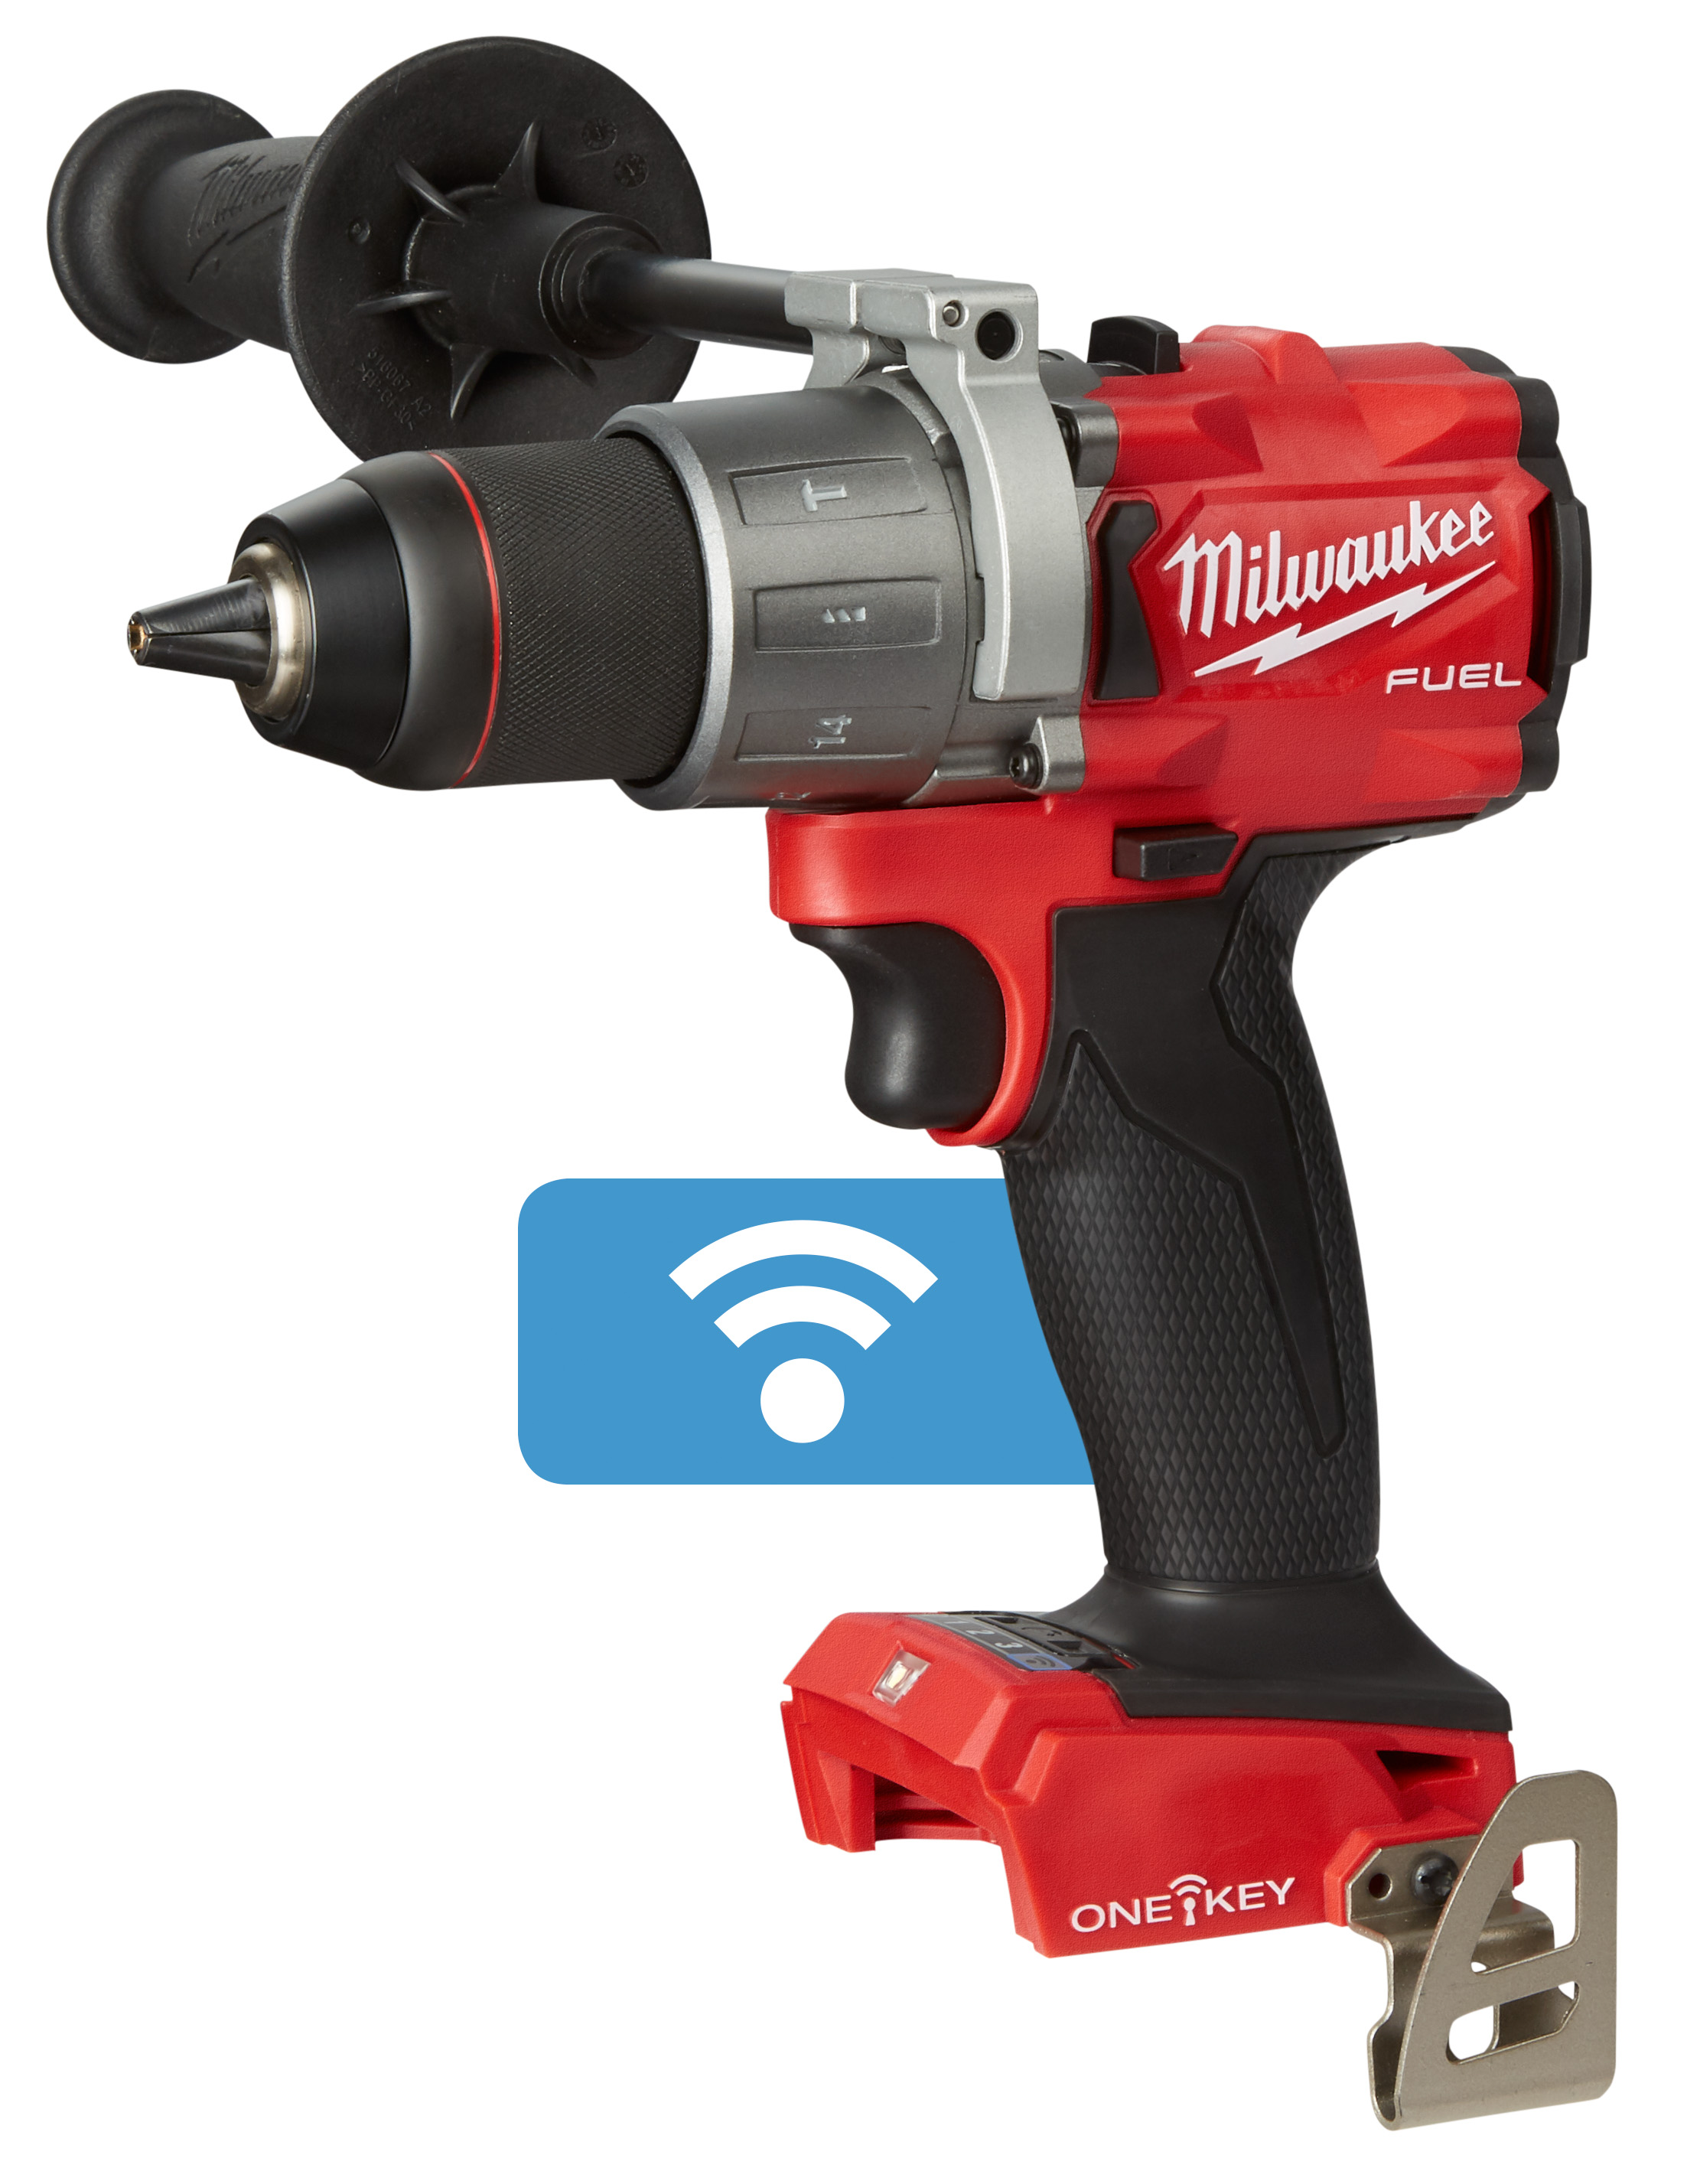 1/2 in. Hammer Drill-Reconditioned